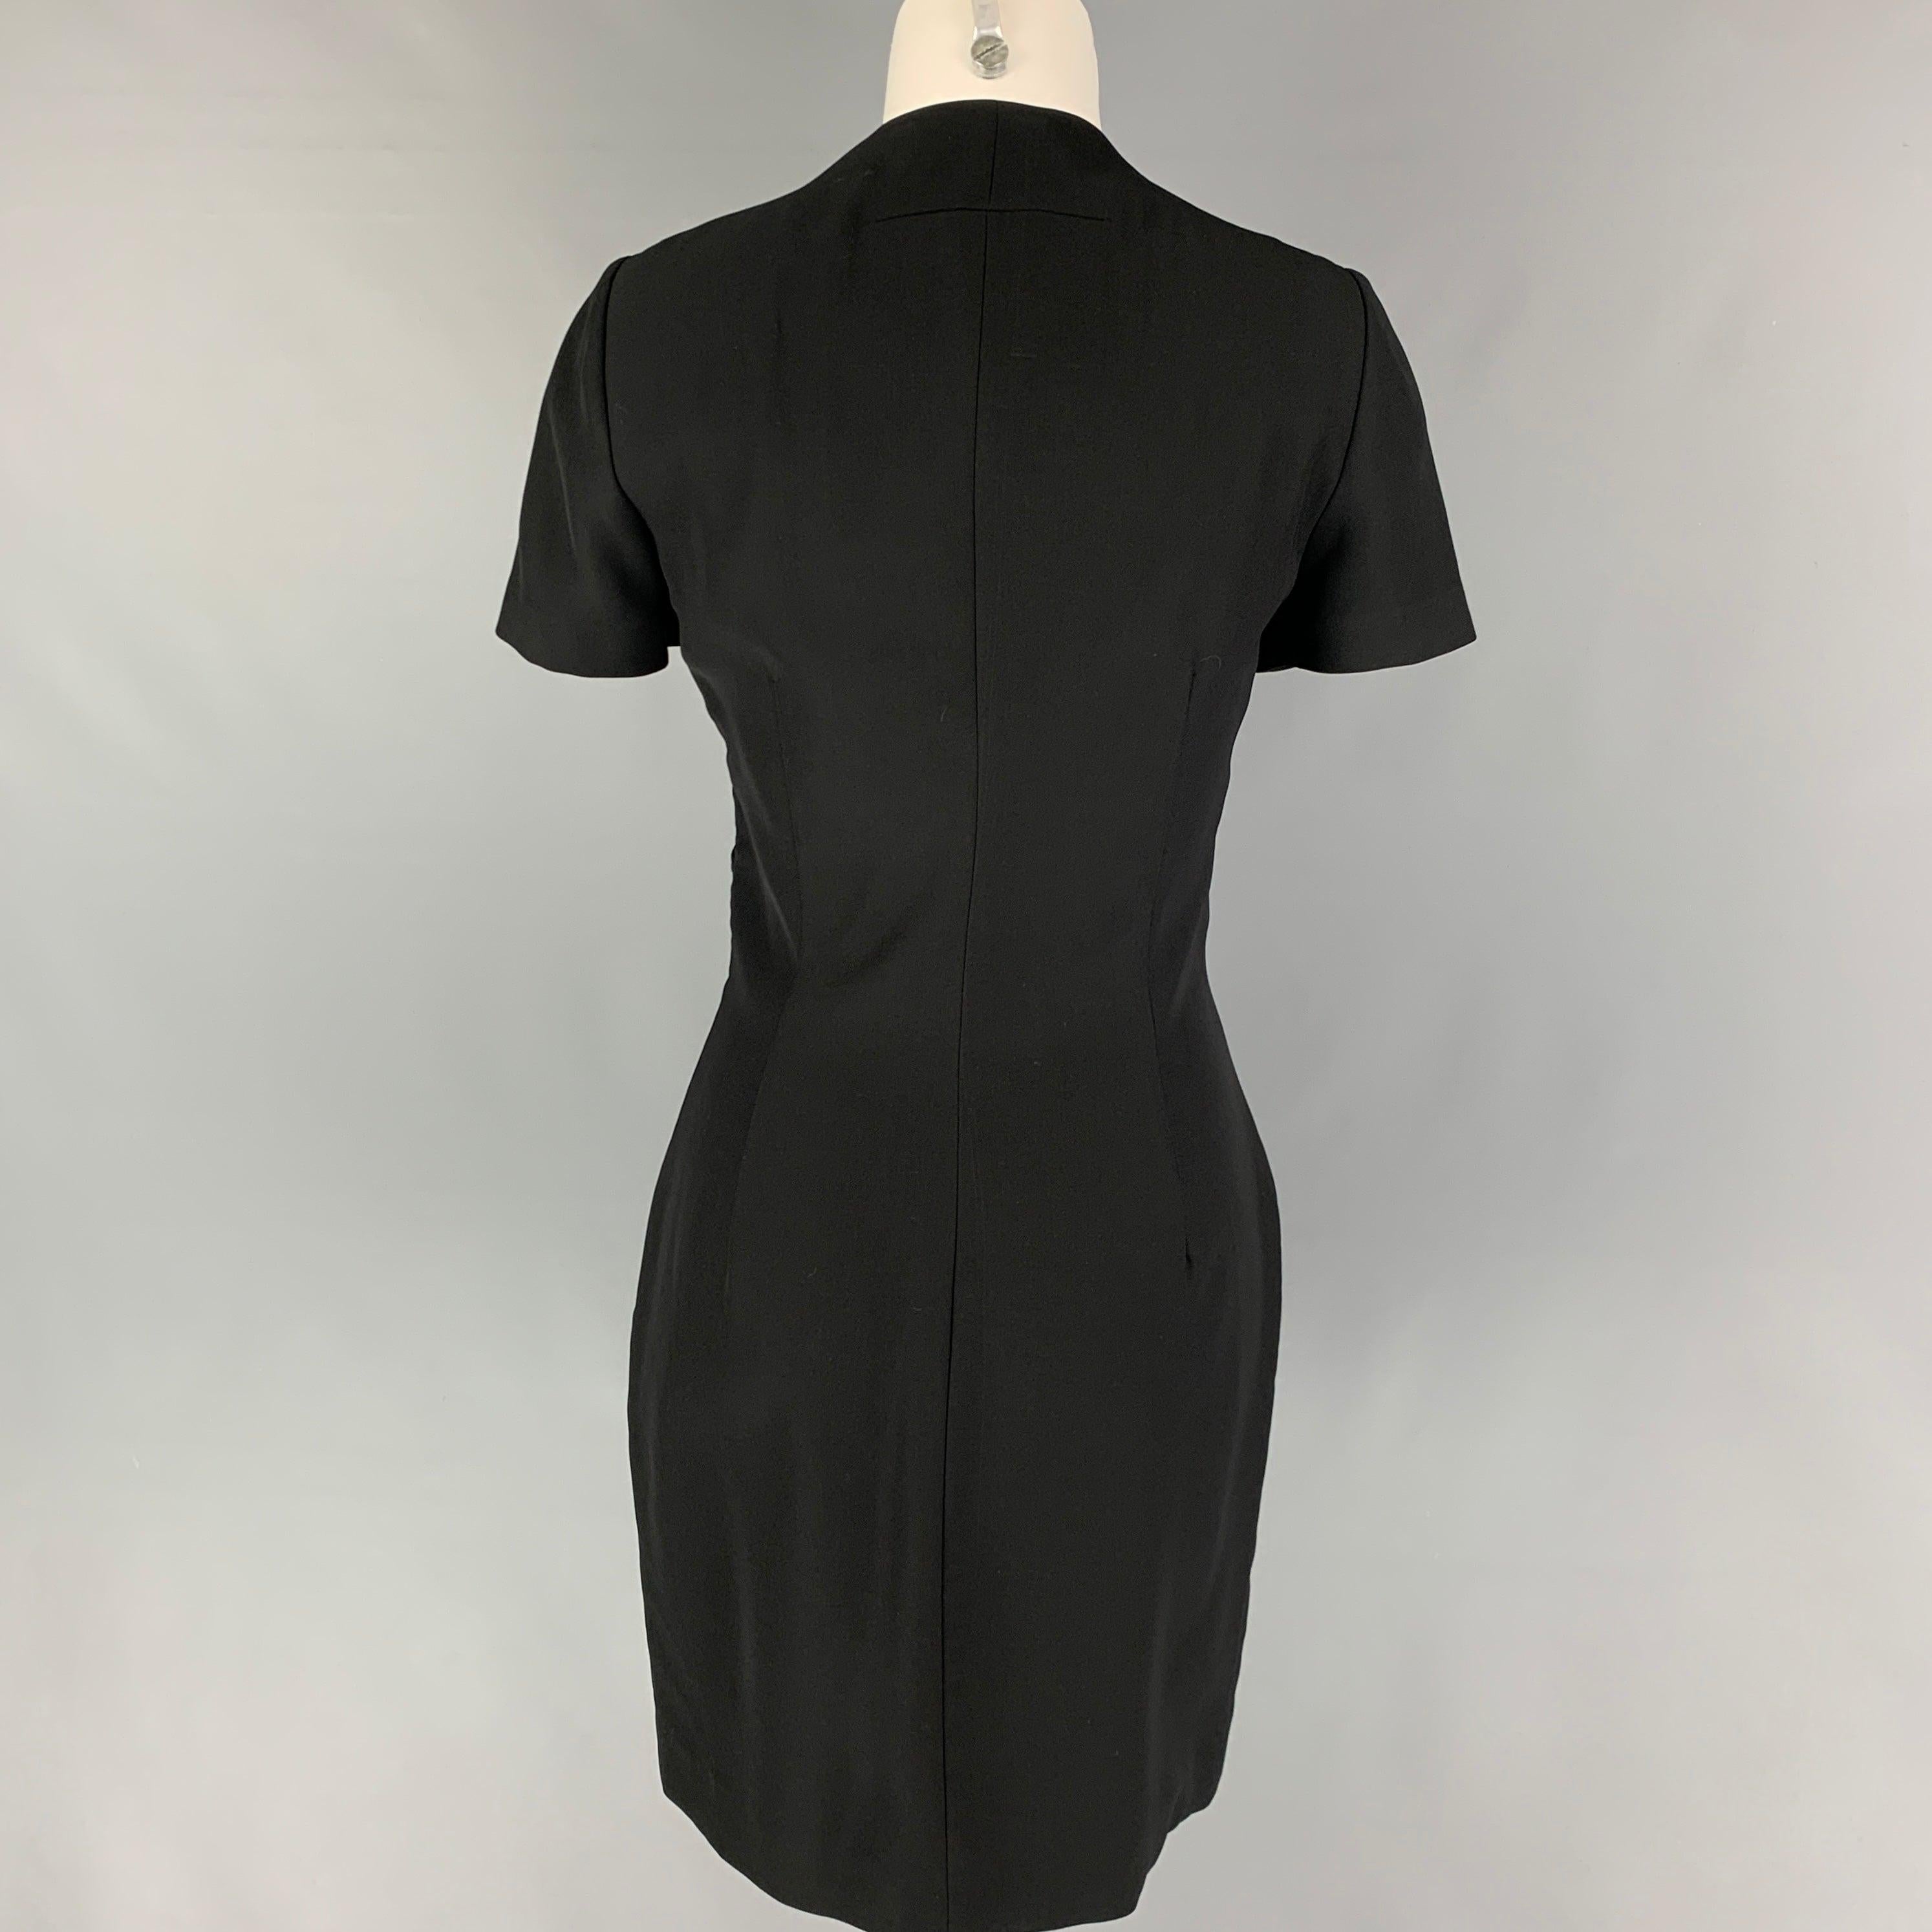 GIVENCHY Size 4 Black Gunmetal Polyester Short Sleeve Dress In Good Condition For Sale In San Francisco, CA